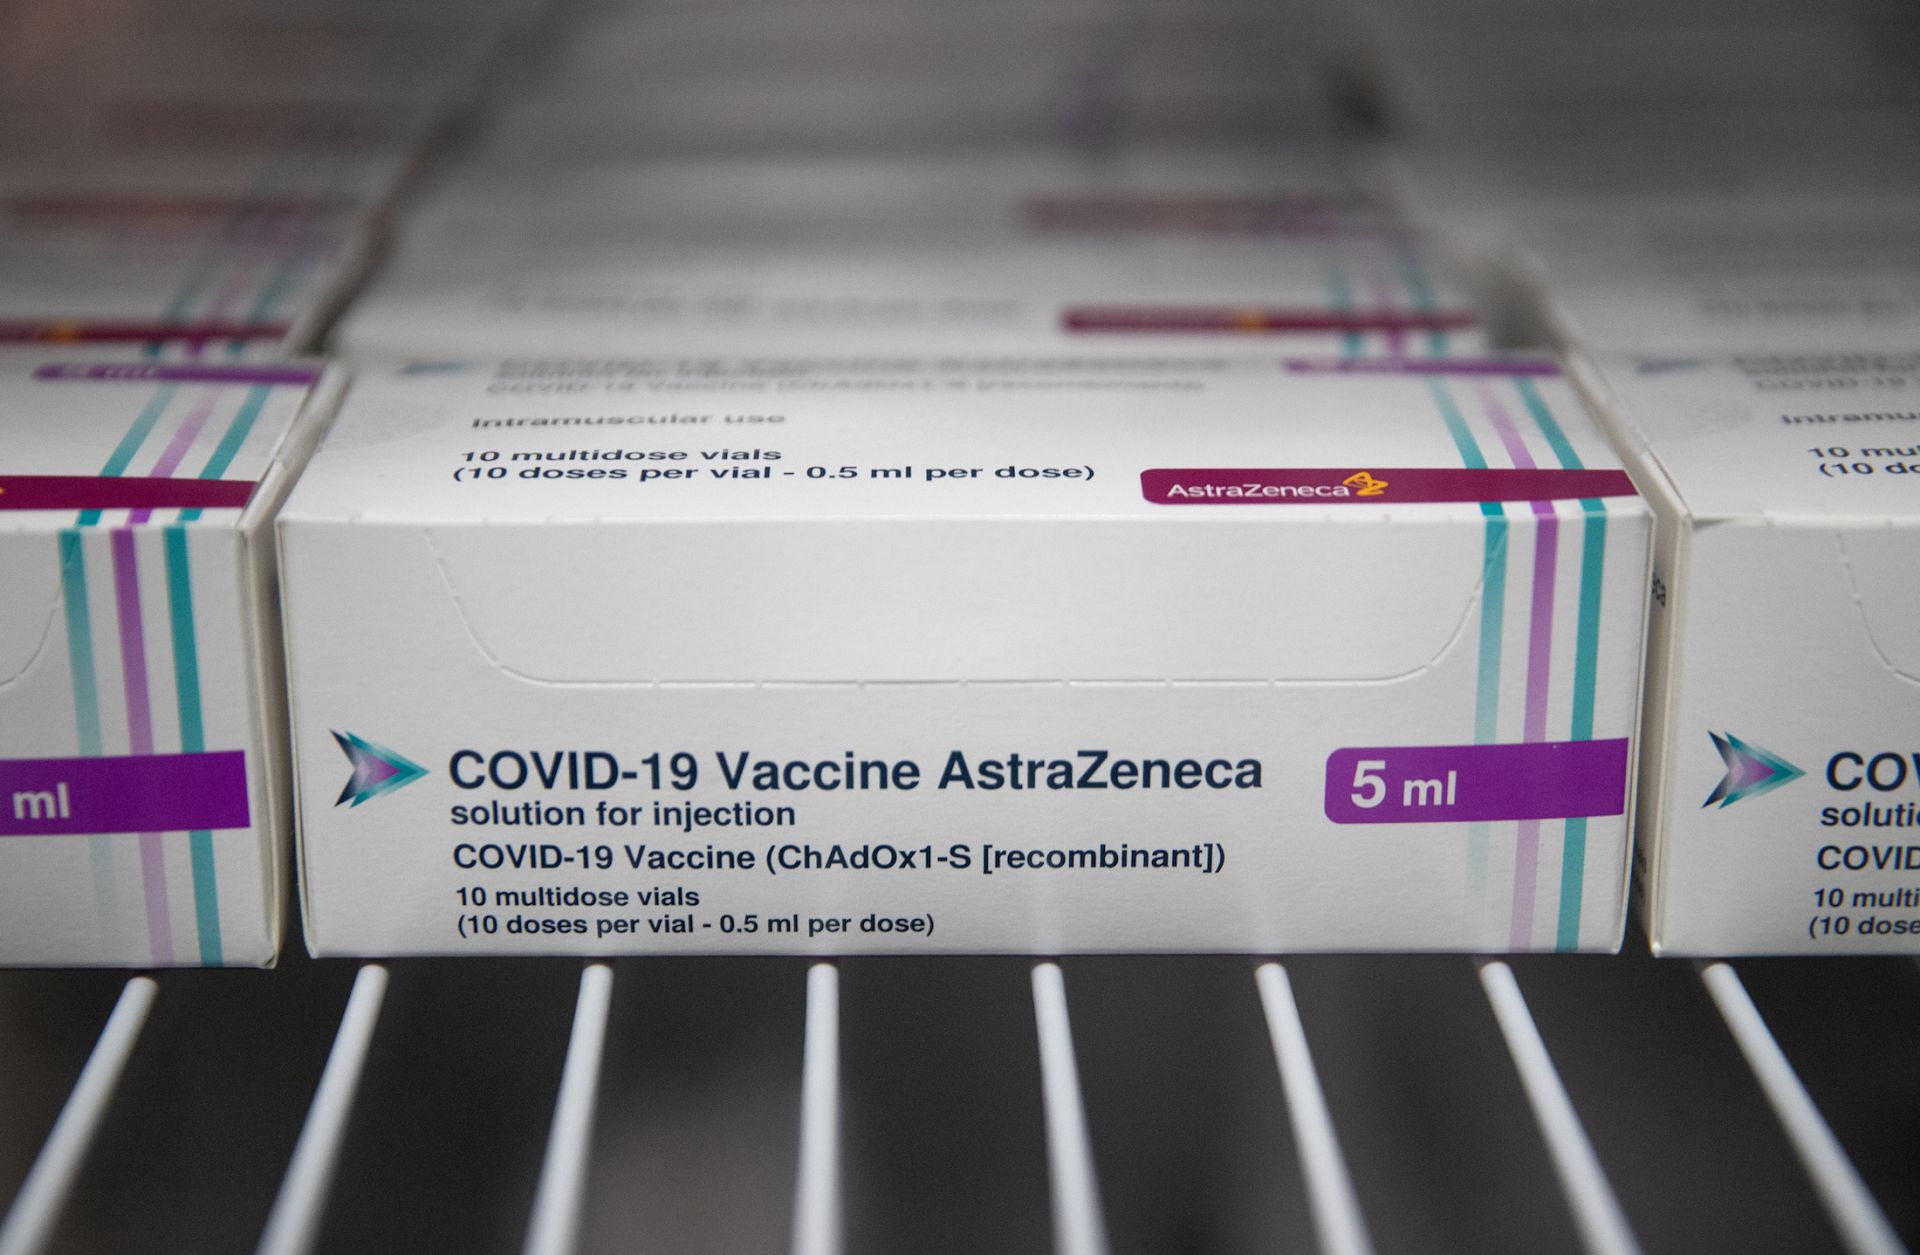 Boxes of vials of the AstraZeneca COVID-19 vaccine sit in a refrigerator at Ashton Gate Stadium in the English city of Bristol on Jan. 9, 2021.